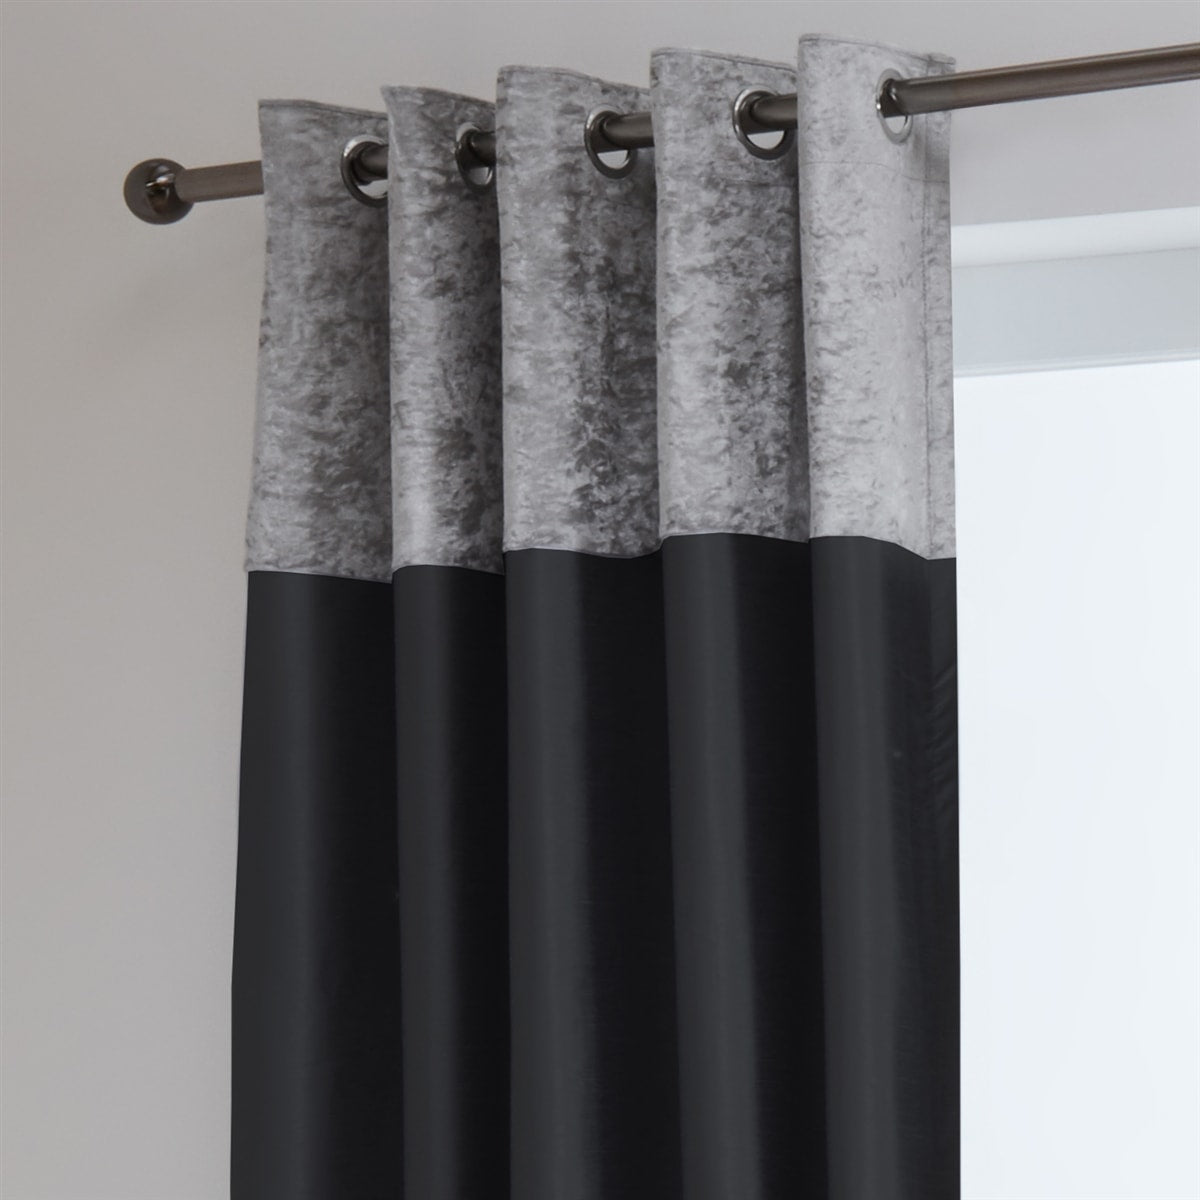 Chloe Crushed Velvet Band Fully Lined Faux Silk Eyelet Curtains (Silver - Black)